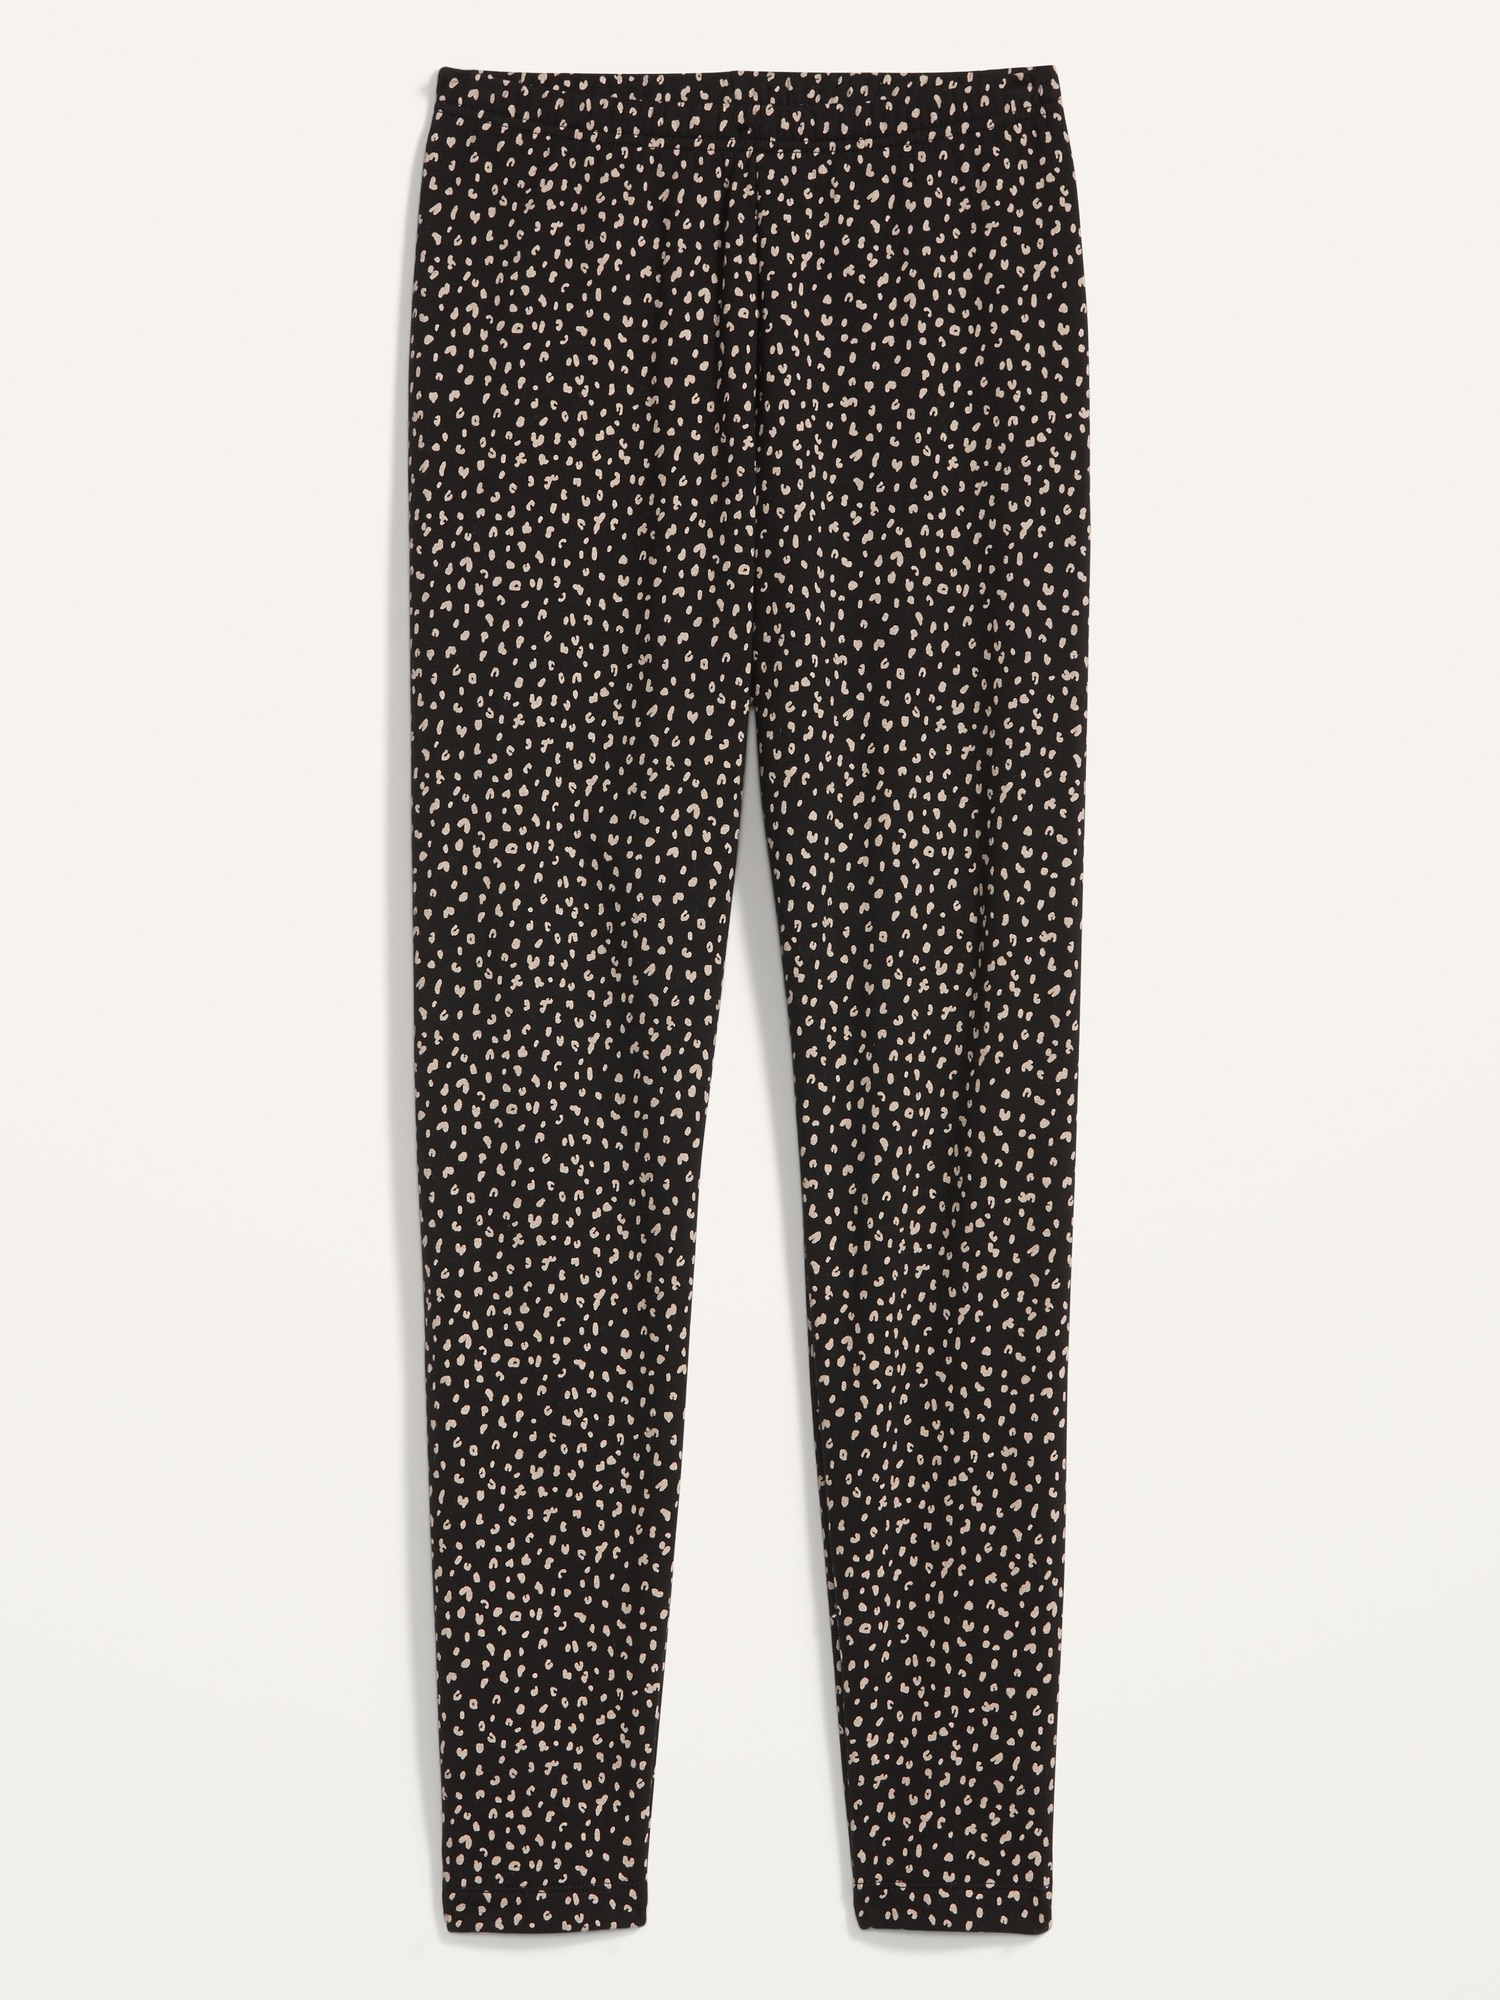 Old Navy Leopard Print Gray Leggings Size M (Tall) - 33% off